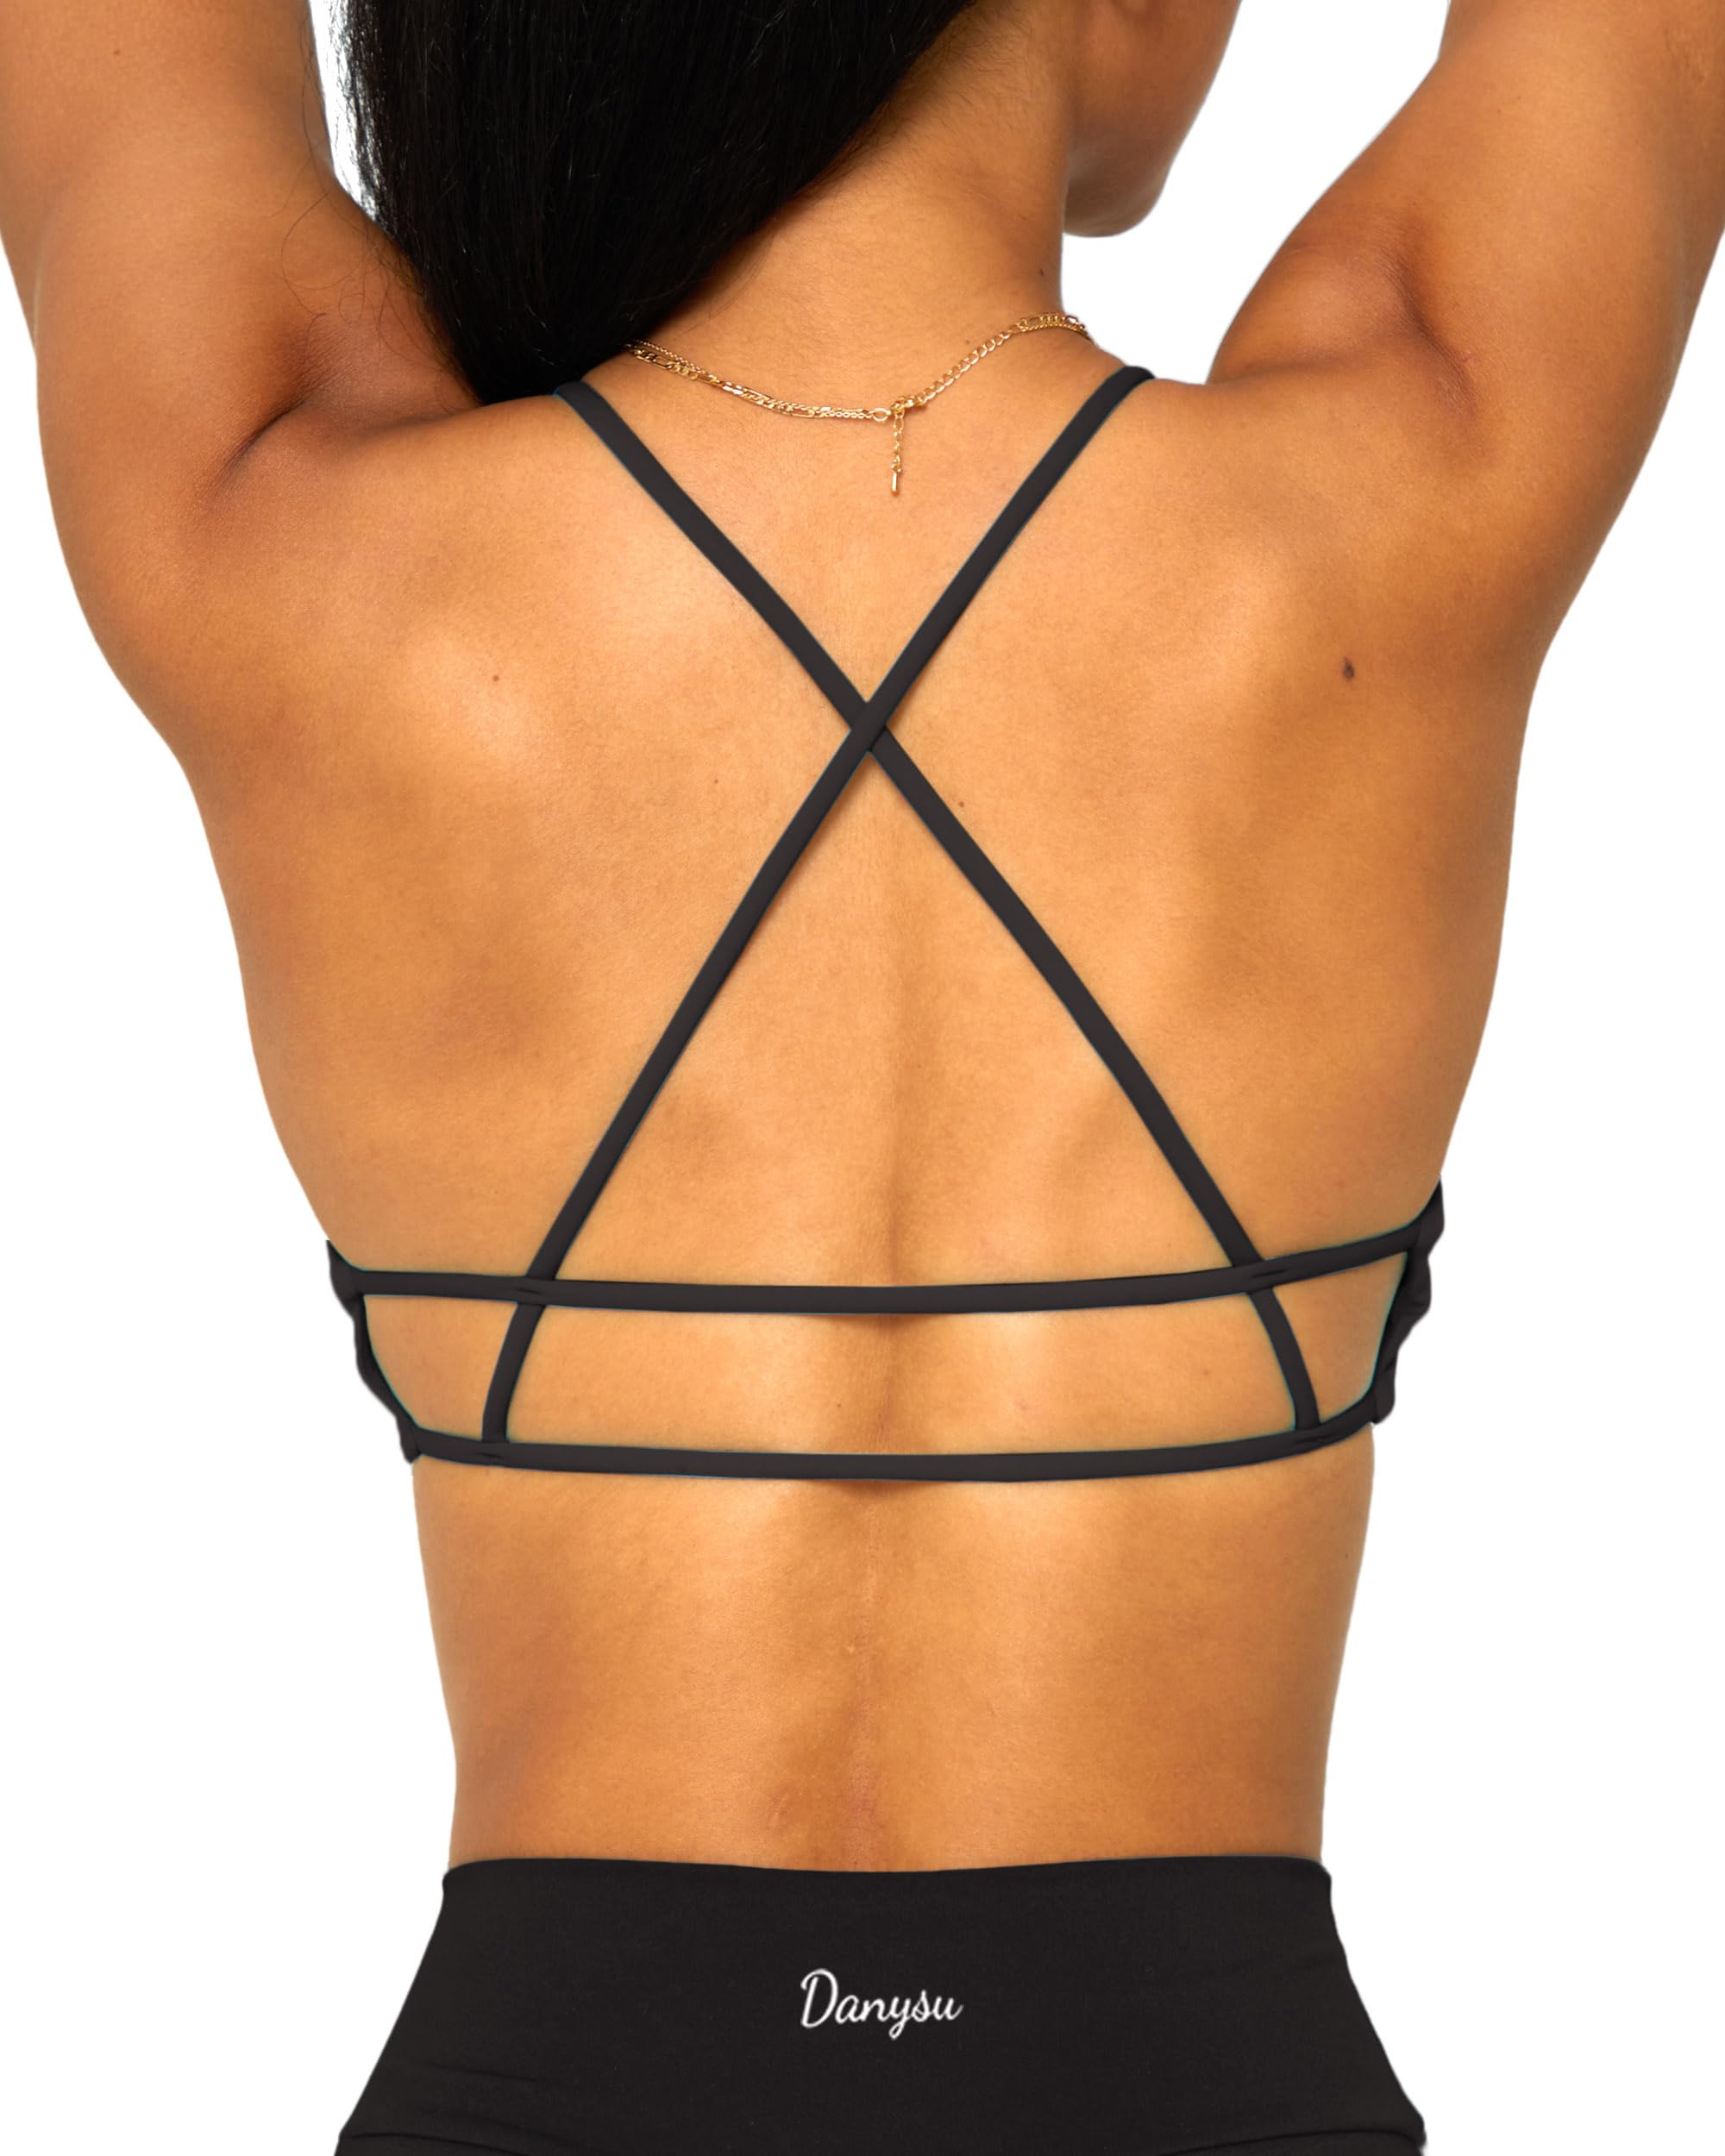 Danysu Backless Longline Sports Bras Light Support Strappy Sexy Padded  Workout Cropped Top, #1.crisscross Black, Small : : Fashion